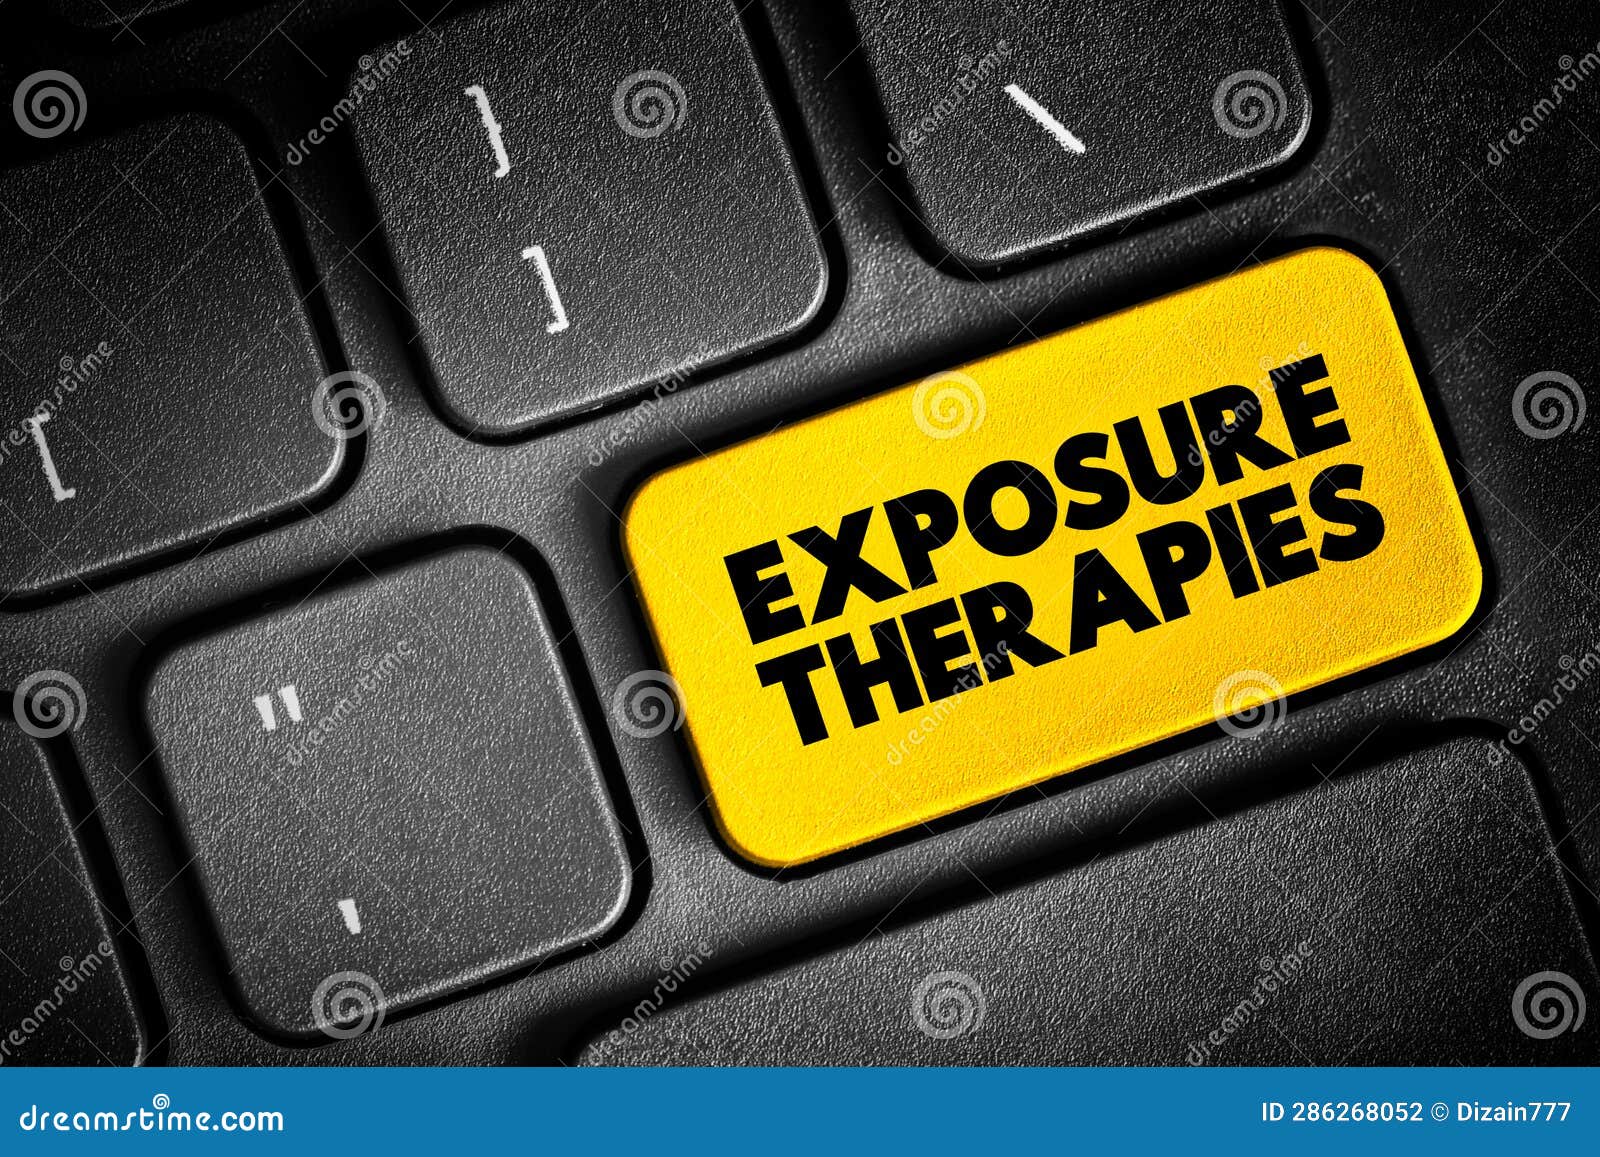 exposure therapies is a technique in behavior therapy to treat anxiety disorders, text button on keyboard, concept background